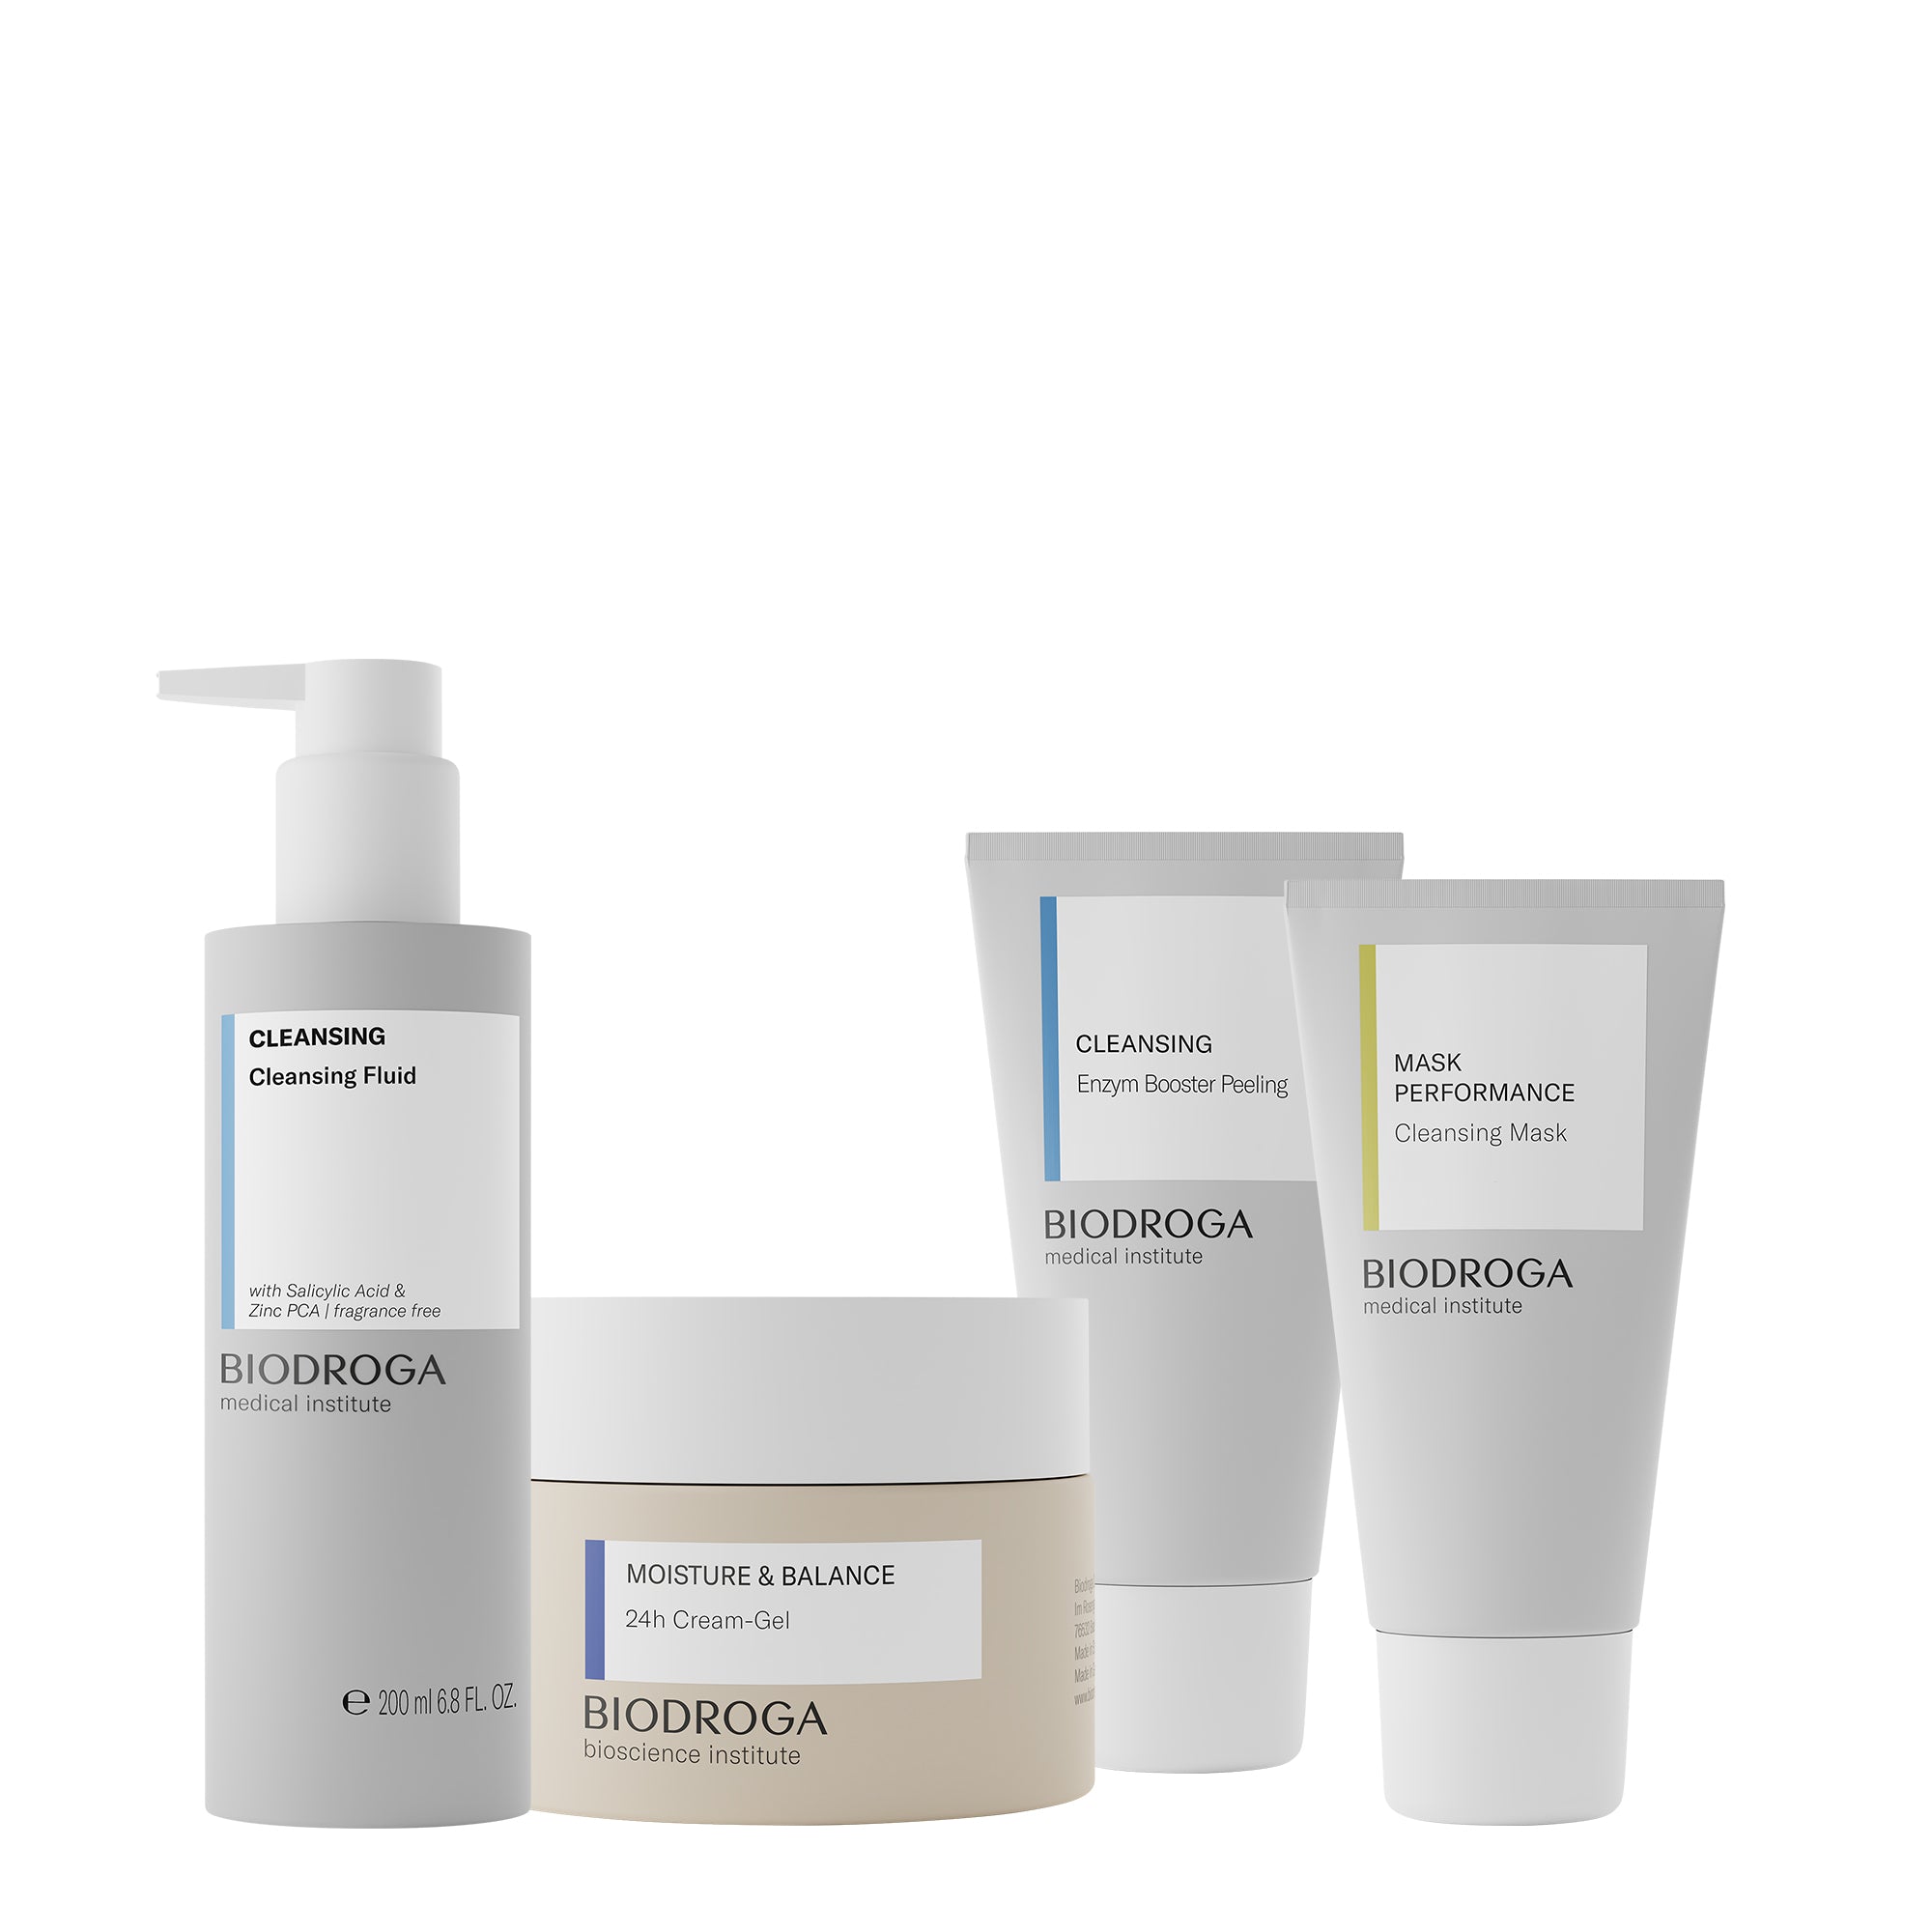 The Purifying Cleansing Skin Care Kit